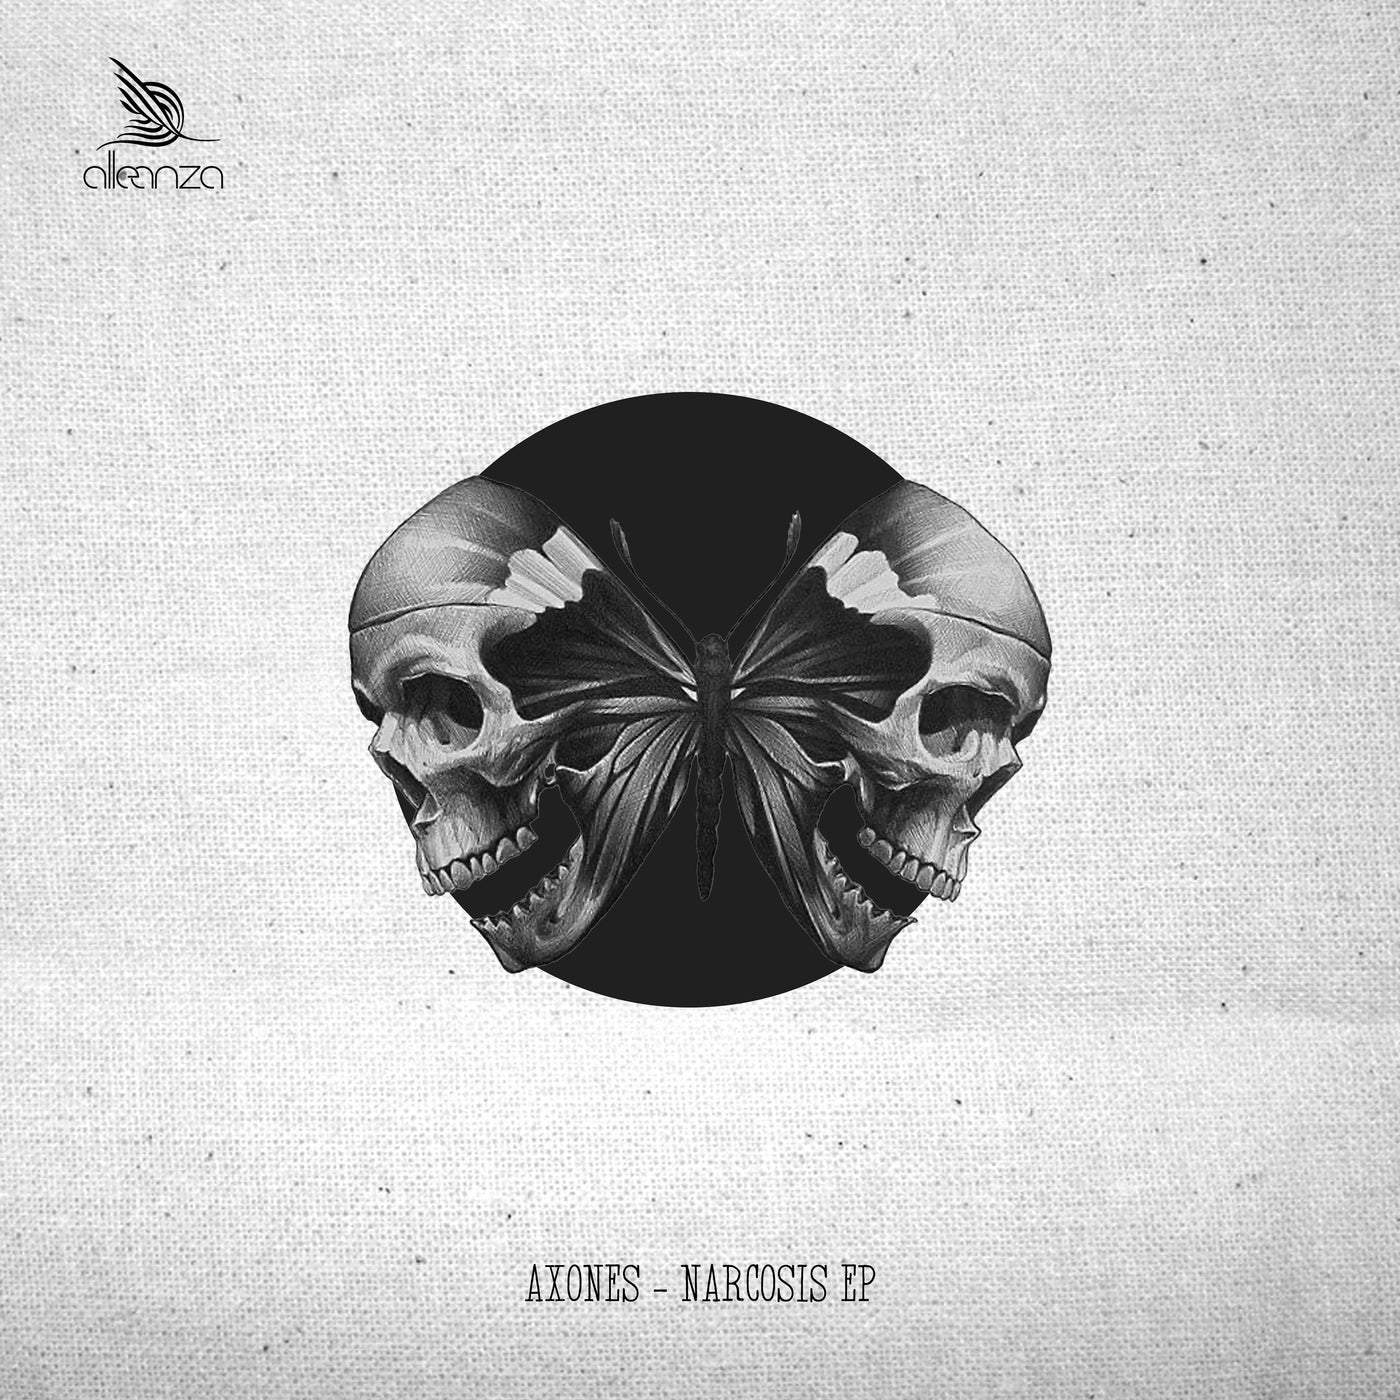 image cover: Axones - Narcosis EP / ALLE192